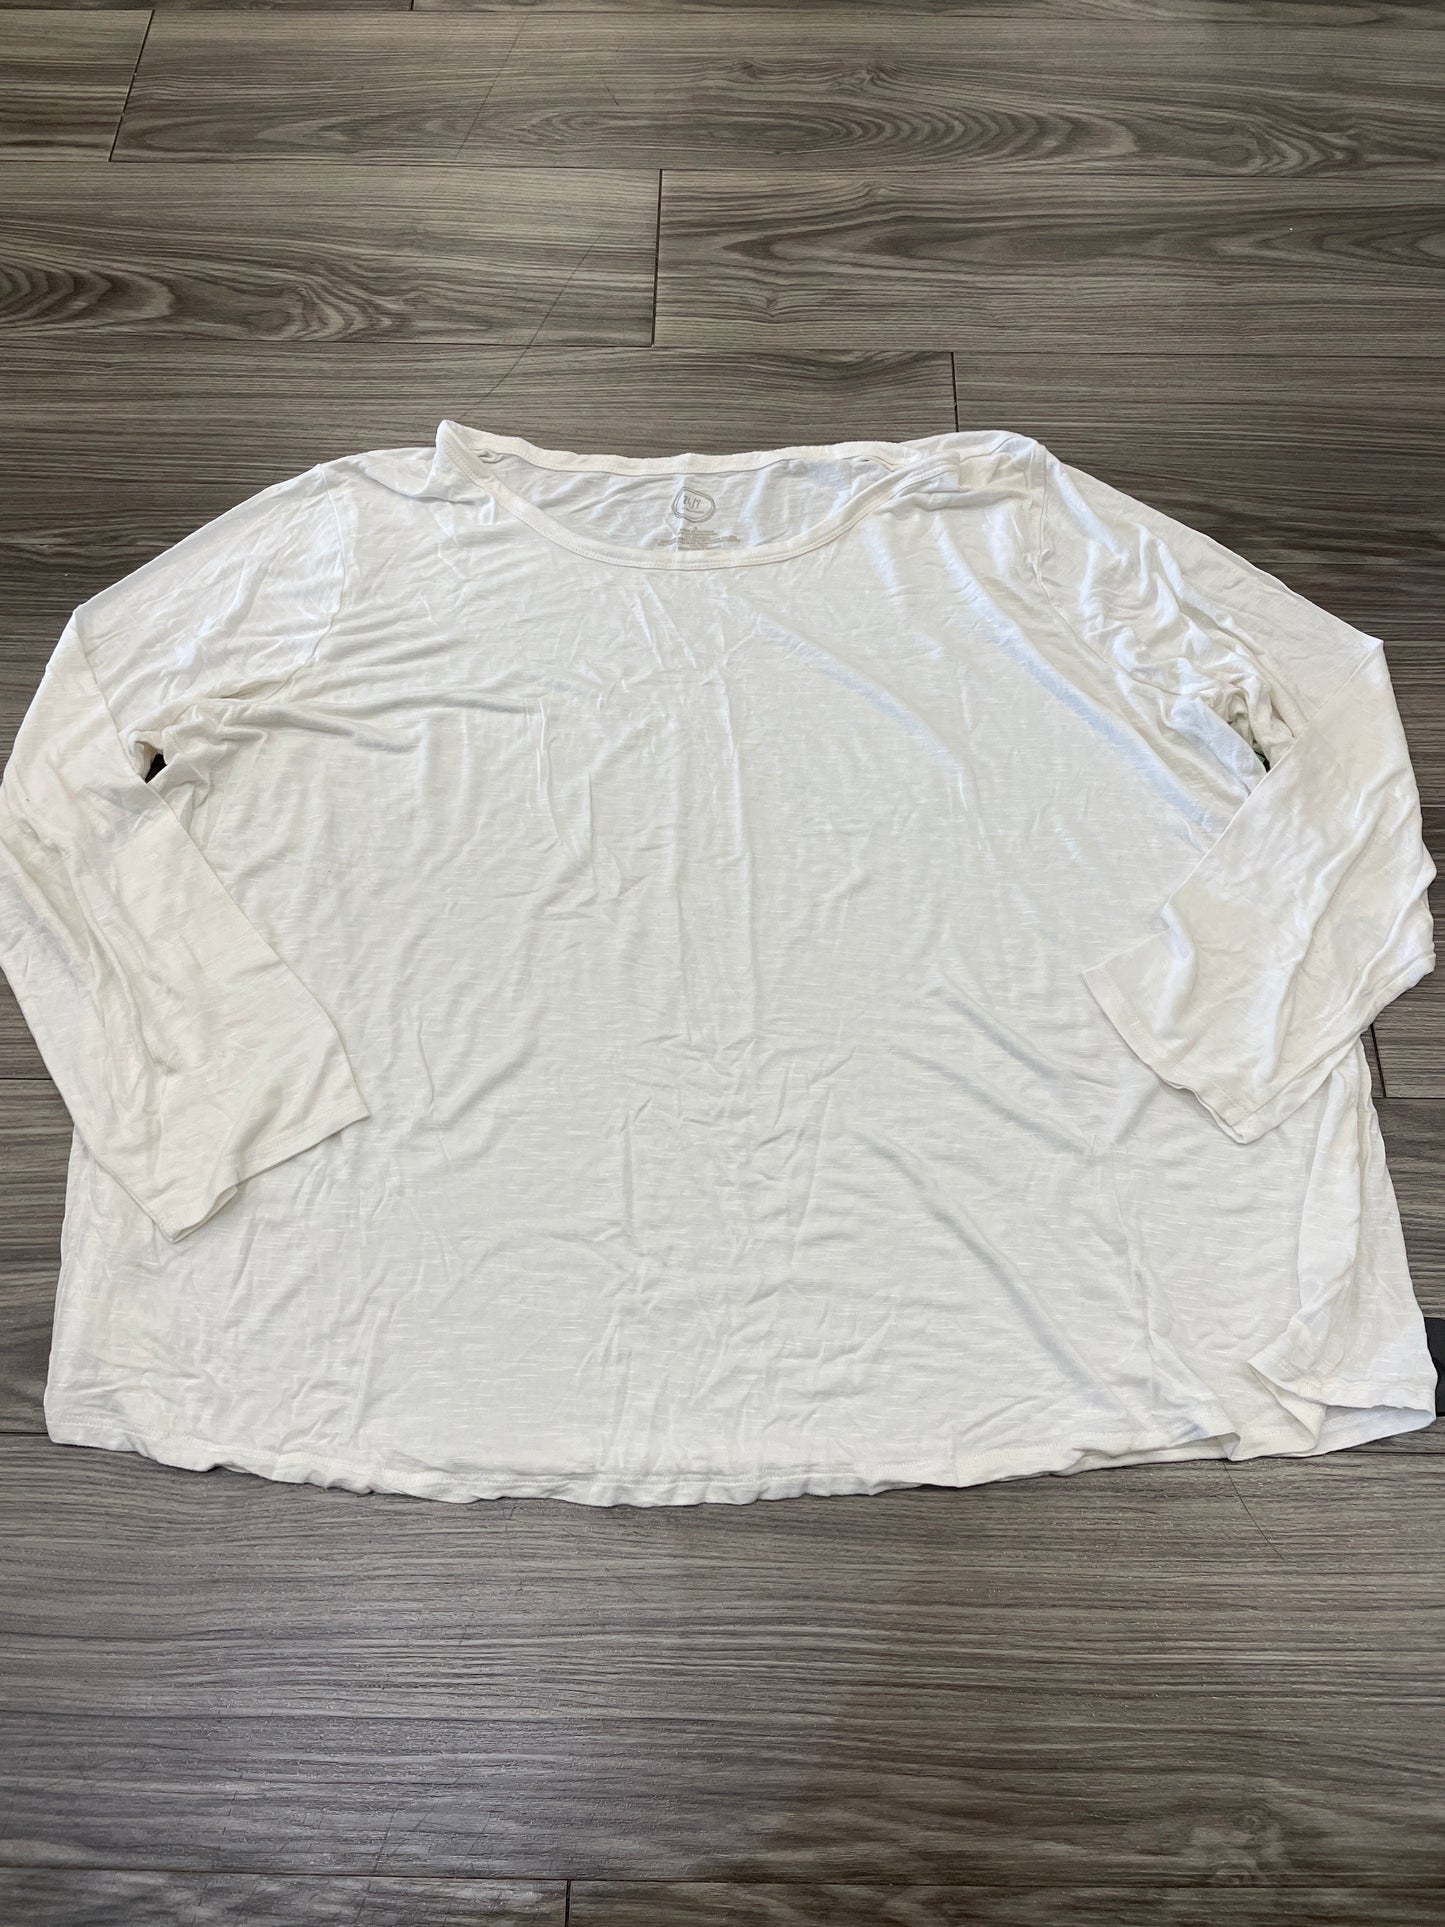 White Top Long Sleeve Maurices, Size 3x